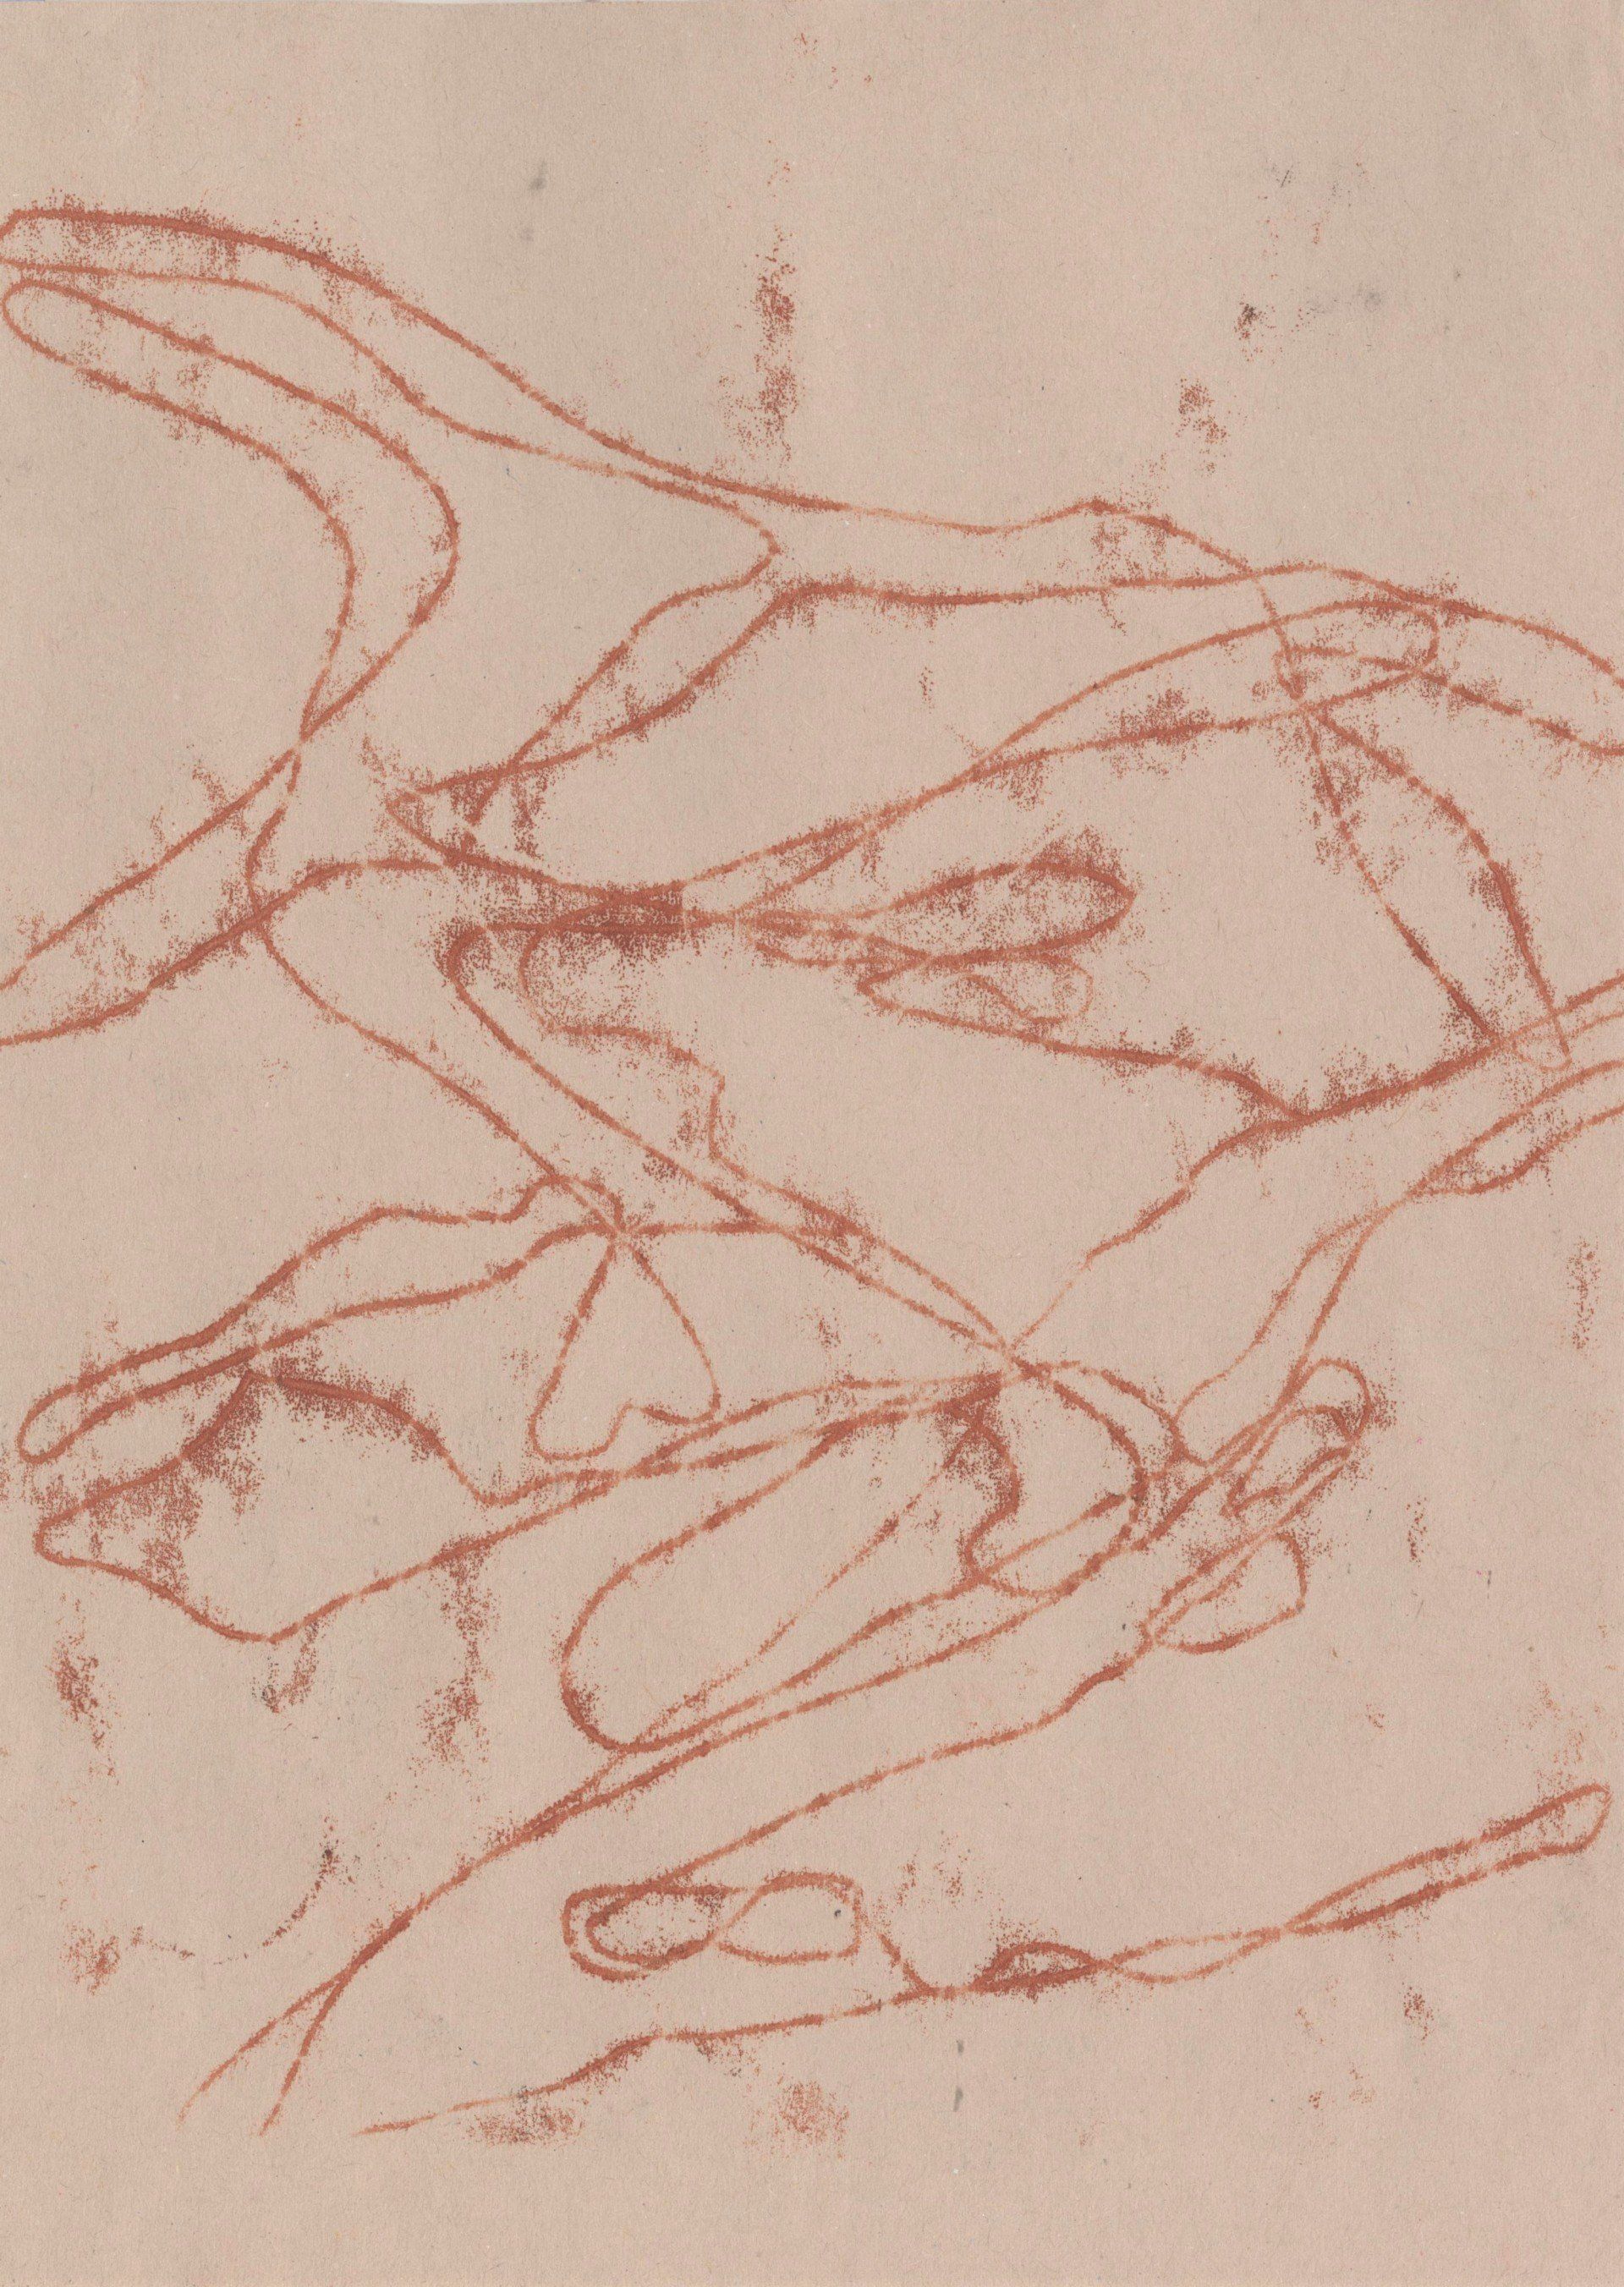 Abstract line drawing in red ink on light brown paper by Siobhan McLaughlin